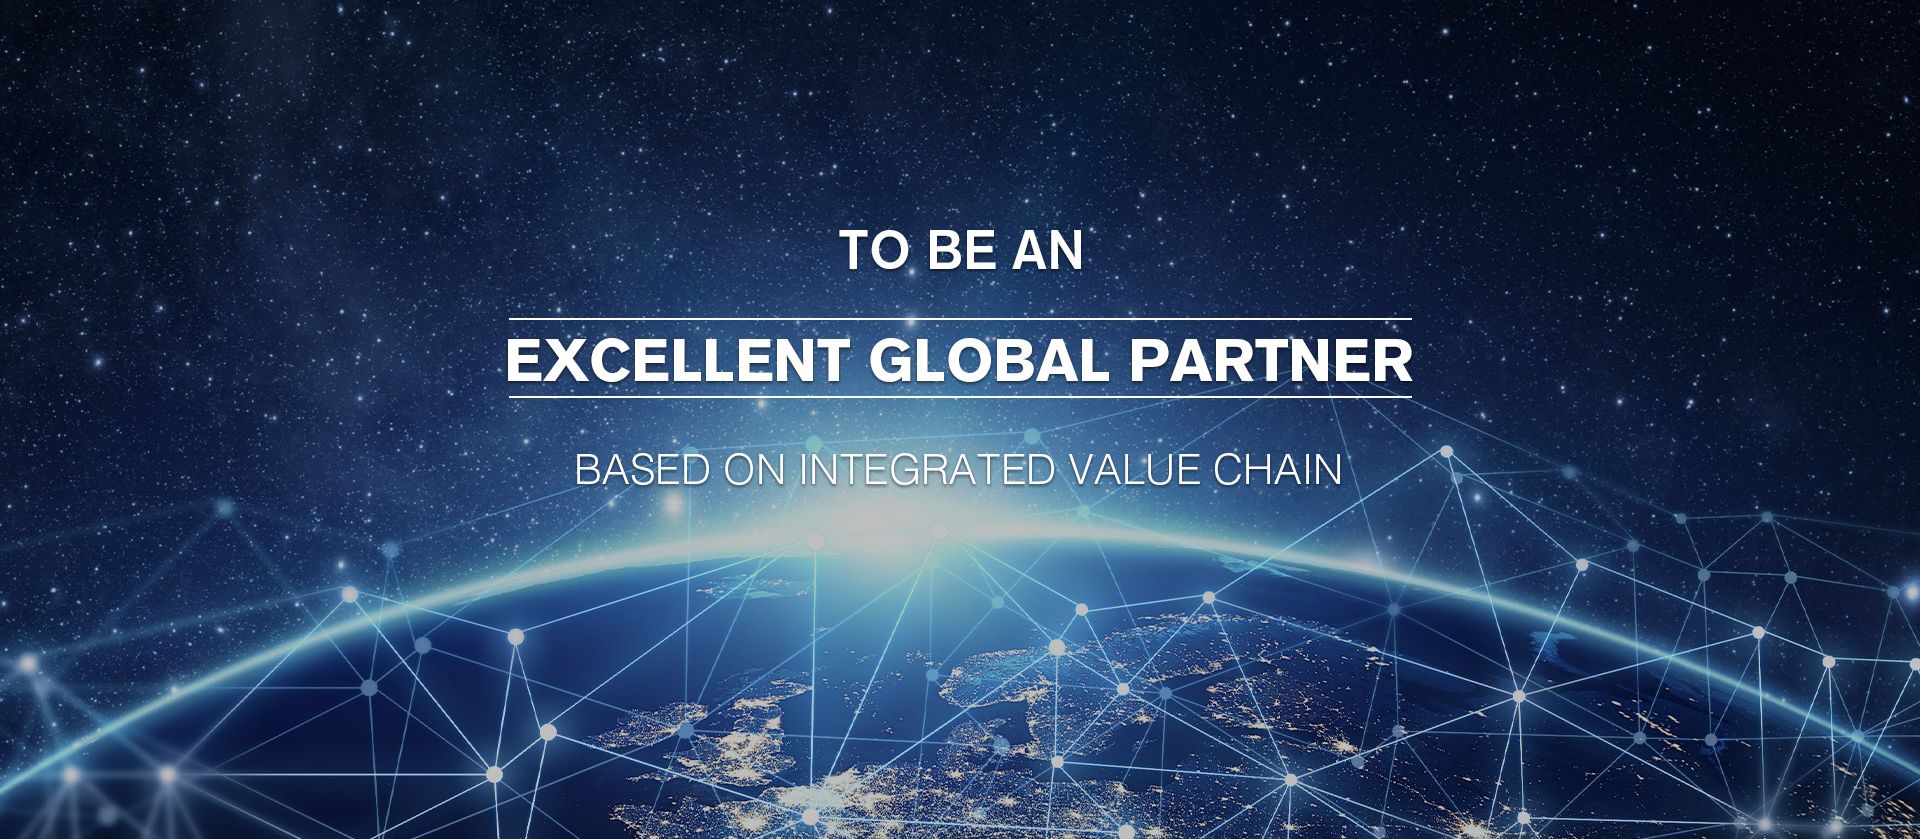 To be an excellent global partner based on integrated value chain